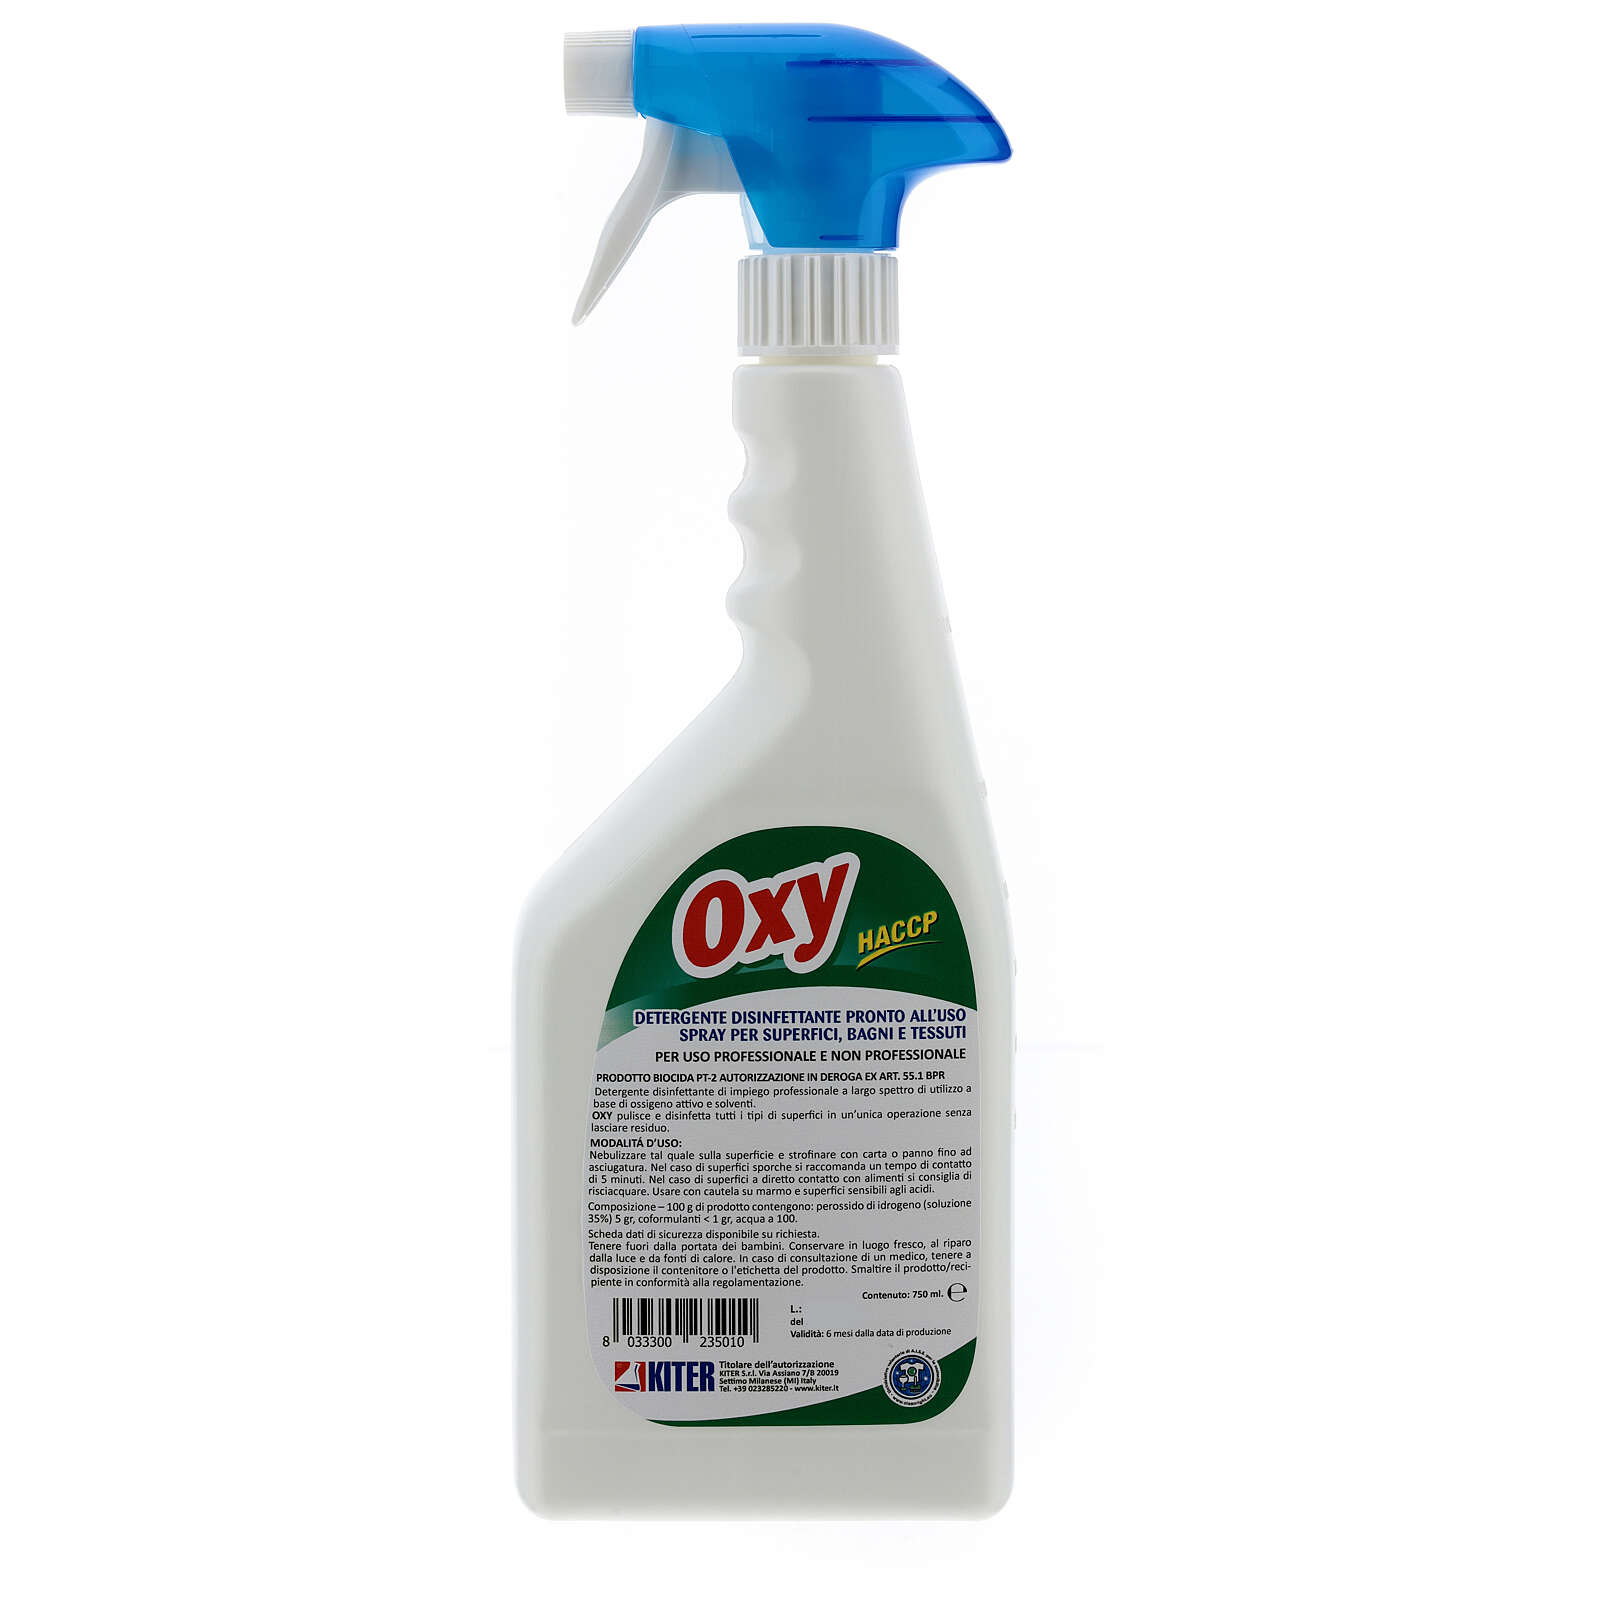 Disinfectant spray, Oxy Biocide 750 ml | online sales on HOLYART.com